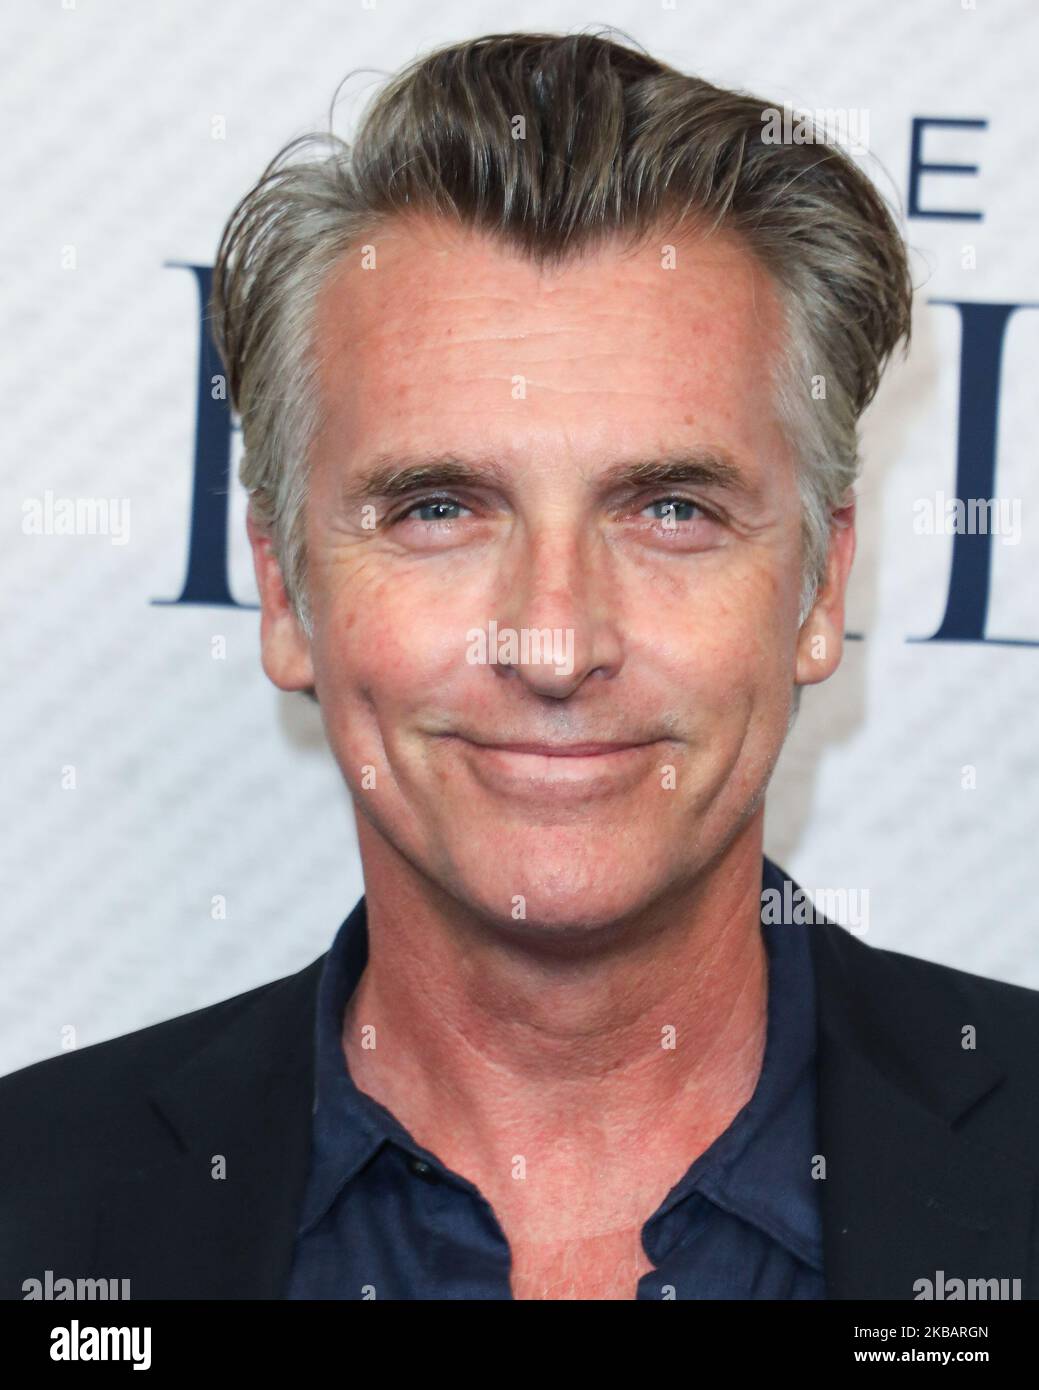 BEVERLY HILLS, LOS ANGELES, CALIFORNIA, USA - NOVEMBER 11: John Pearson arrives at the Los Angeles Premiere Of HBO Documentary Films' 'Very Ralph' held at The Paley Center for Media on November 11, 2019 in Beverly Hills, Los Angeles, California, United States. (Photo by Image Press Agency/NurPhoto) Stock Photo